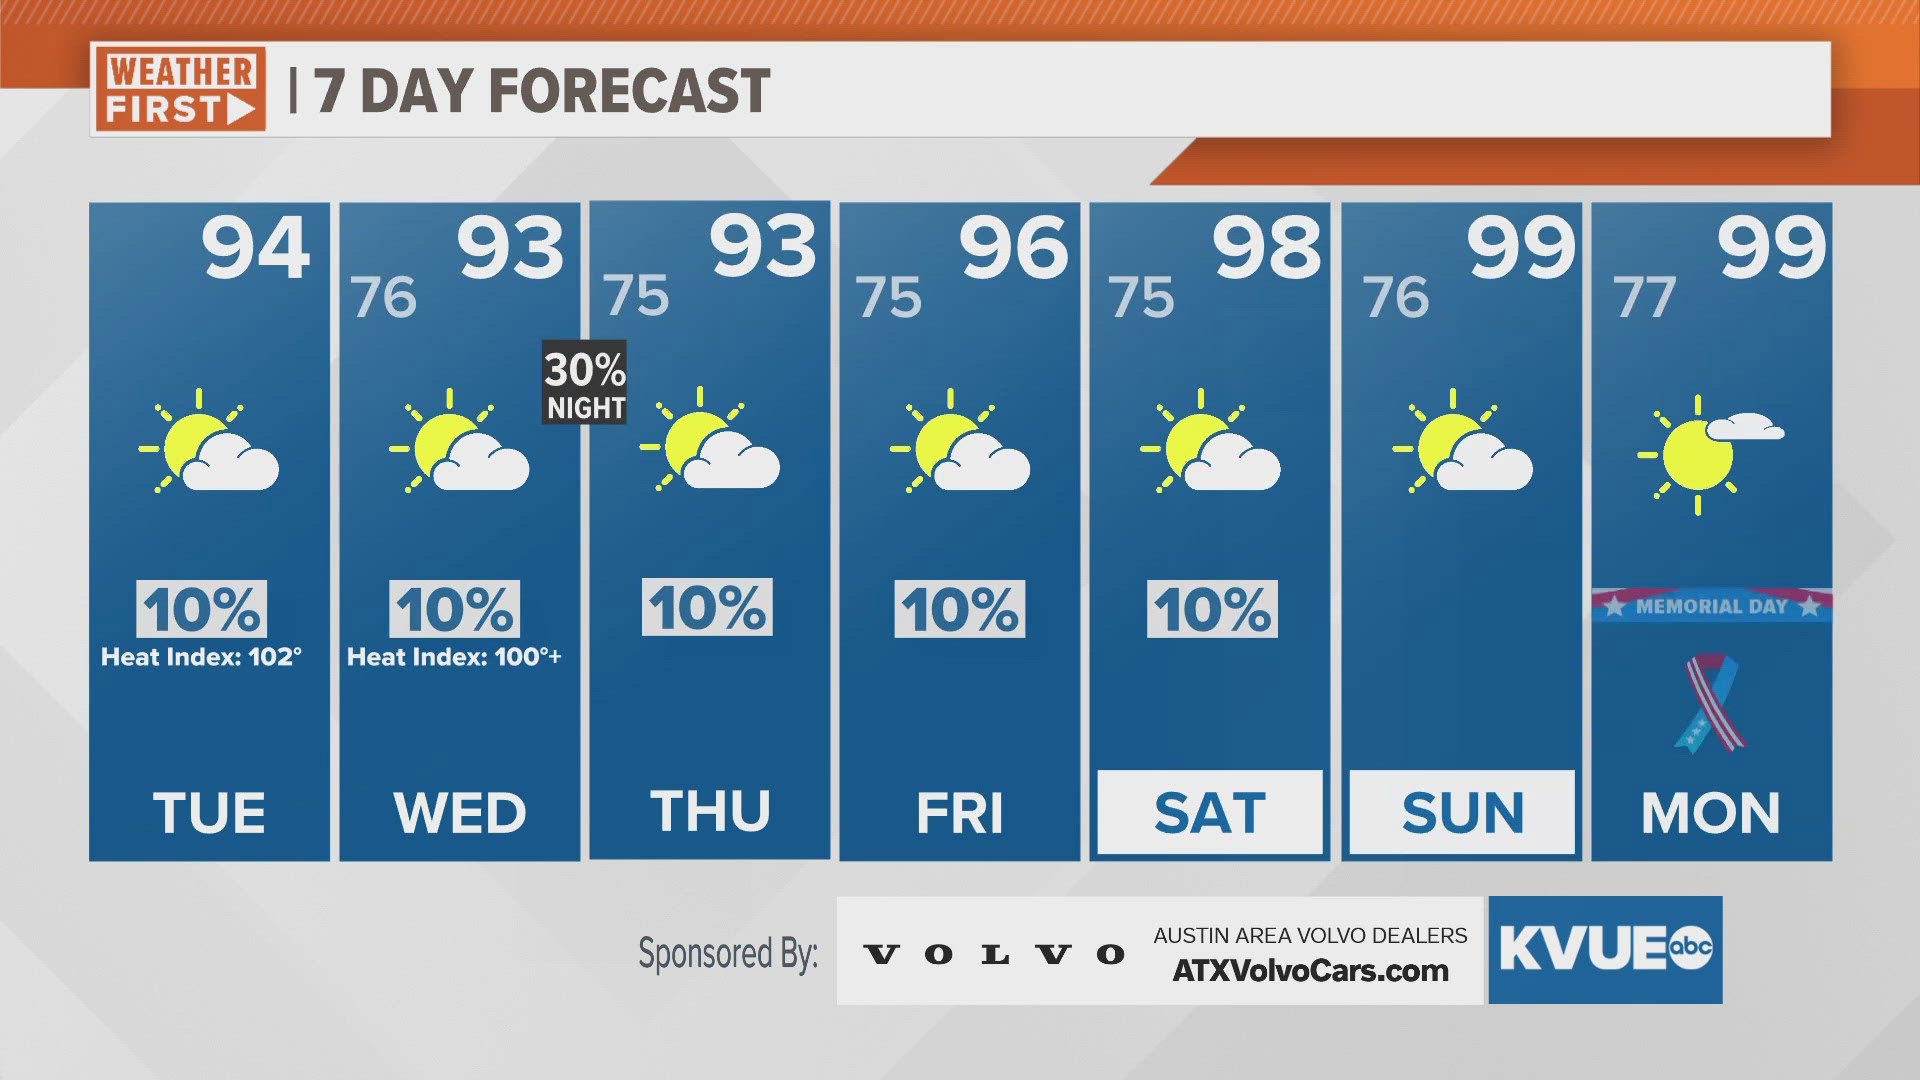 Heat wave arriving to Central Texas in time for Memorial Day Weekend